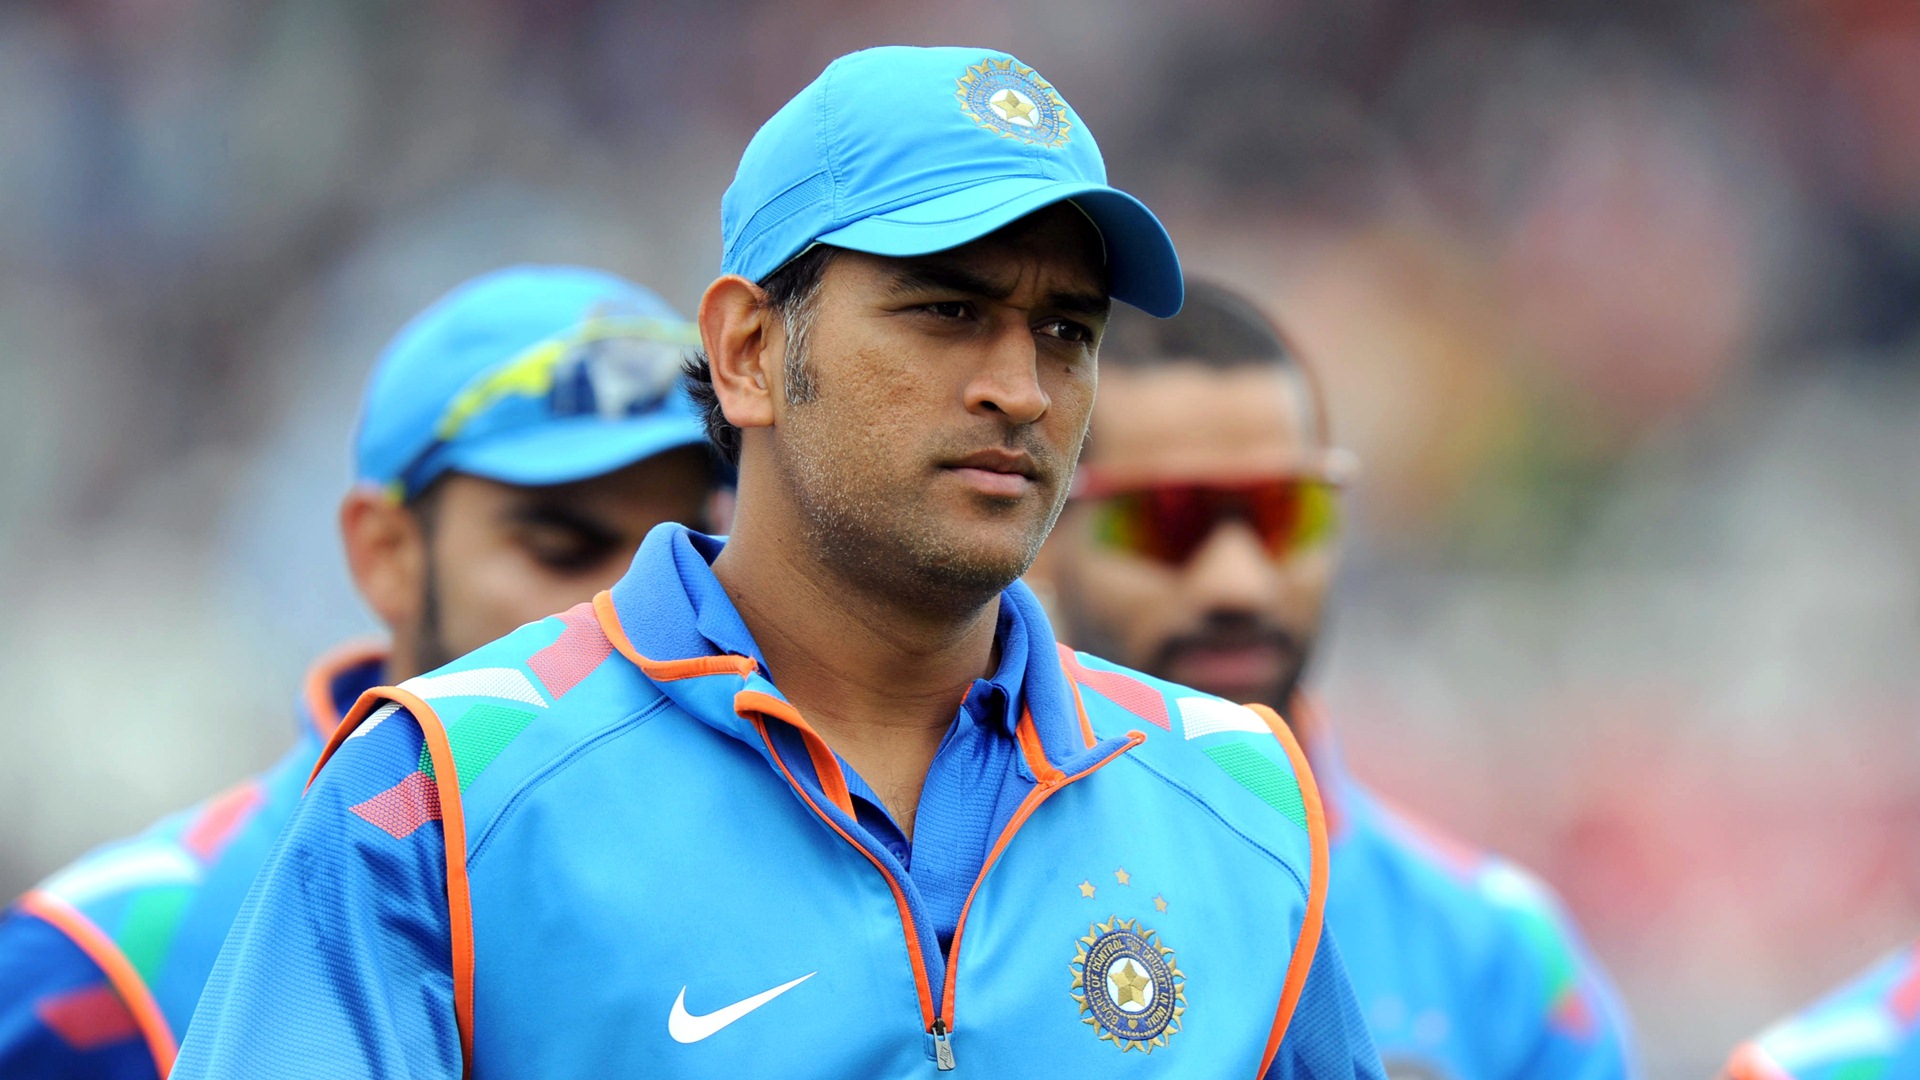 Download Msd Picks Up Stakes Wallpaper | Wallpapers.com